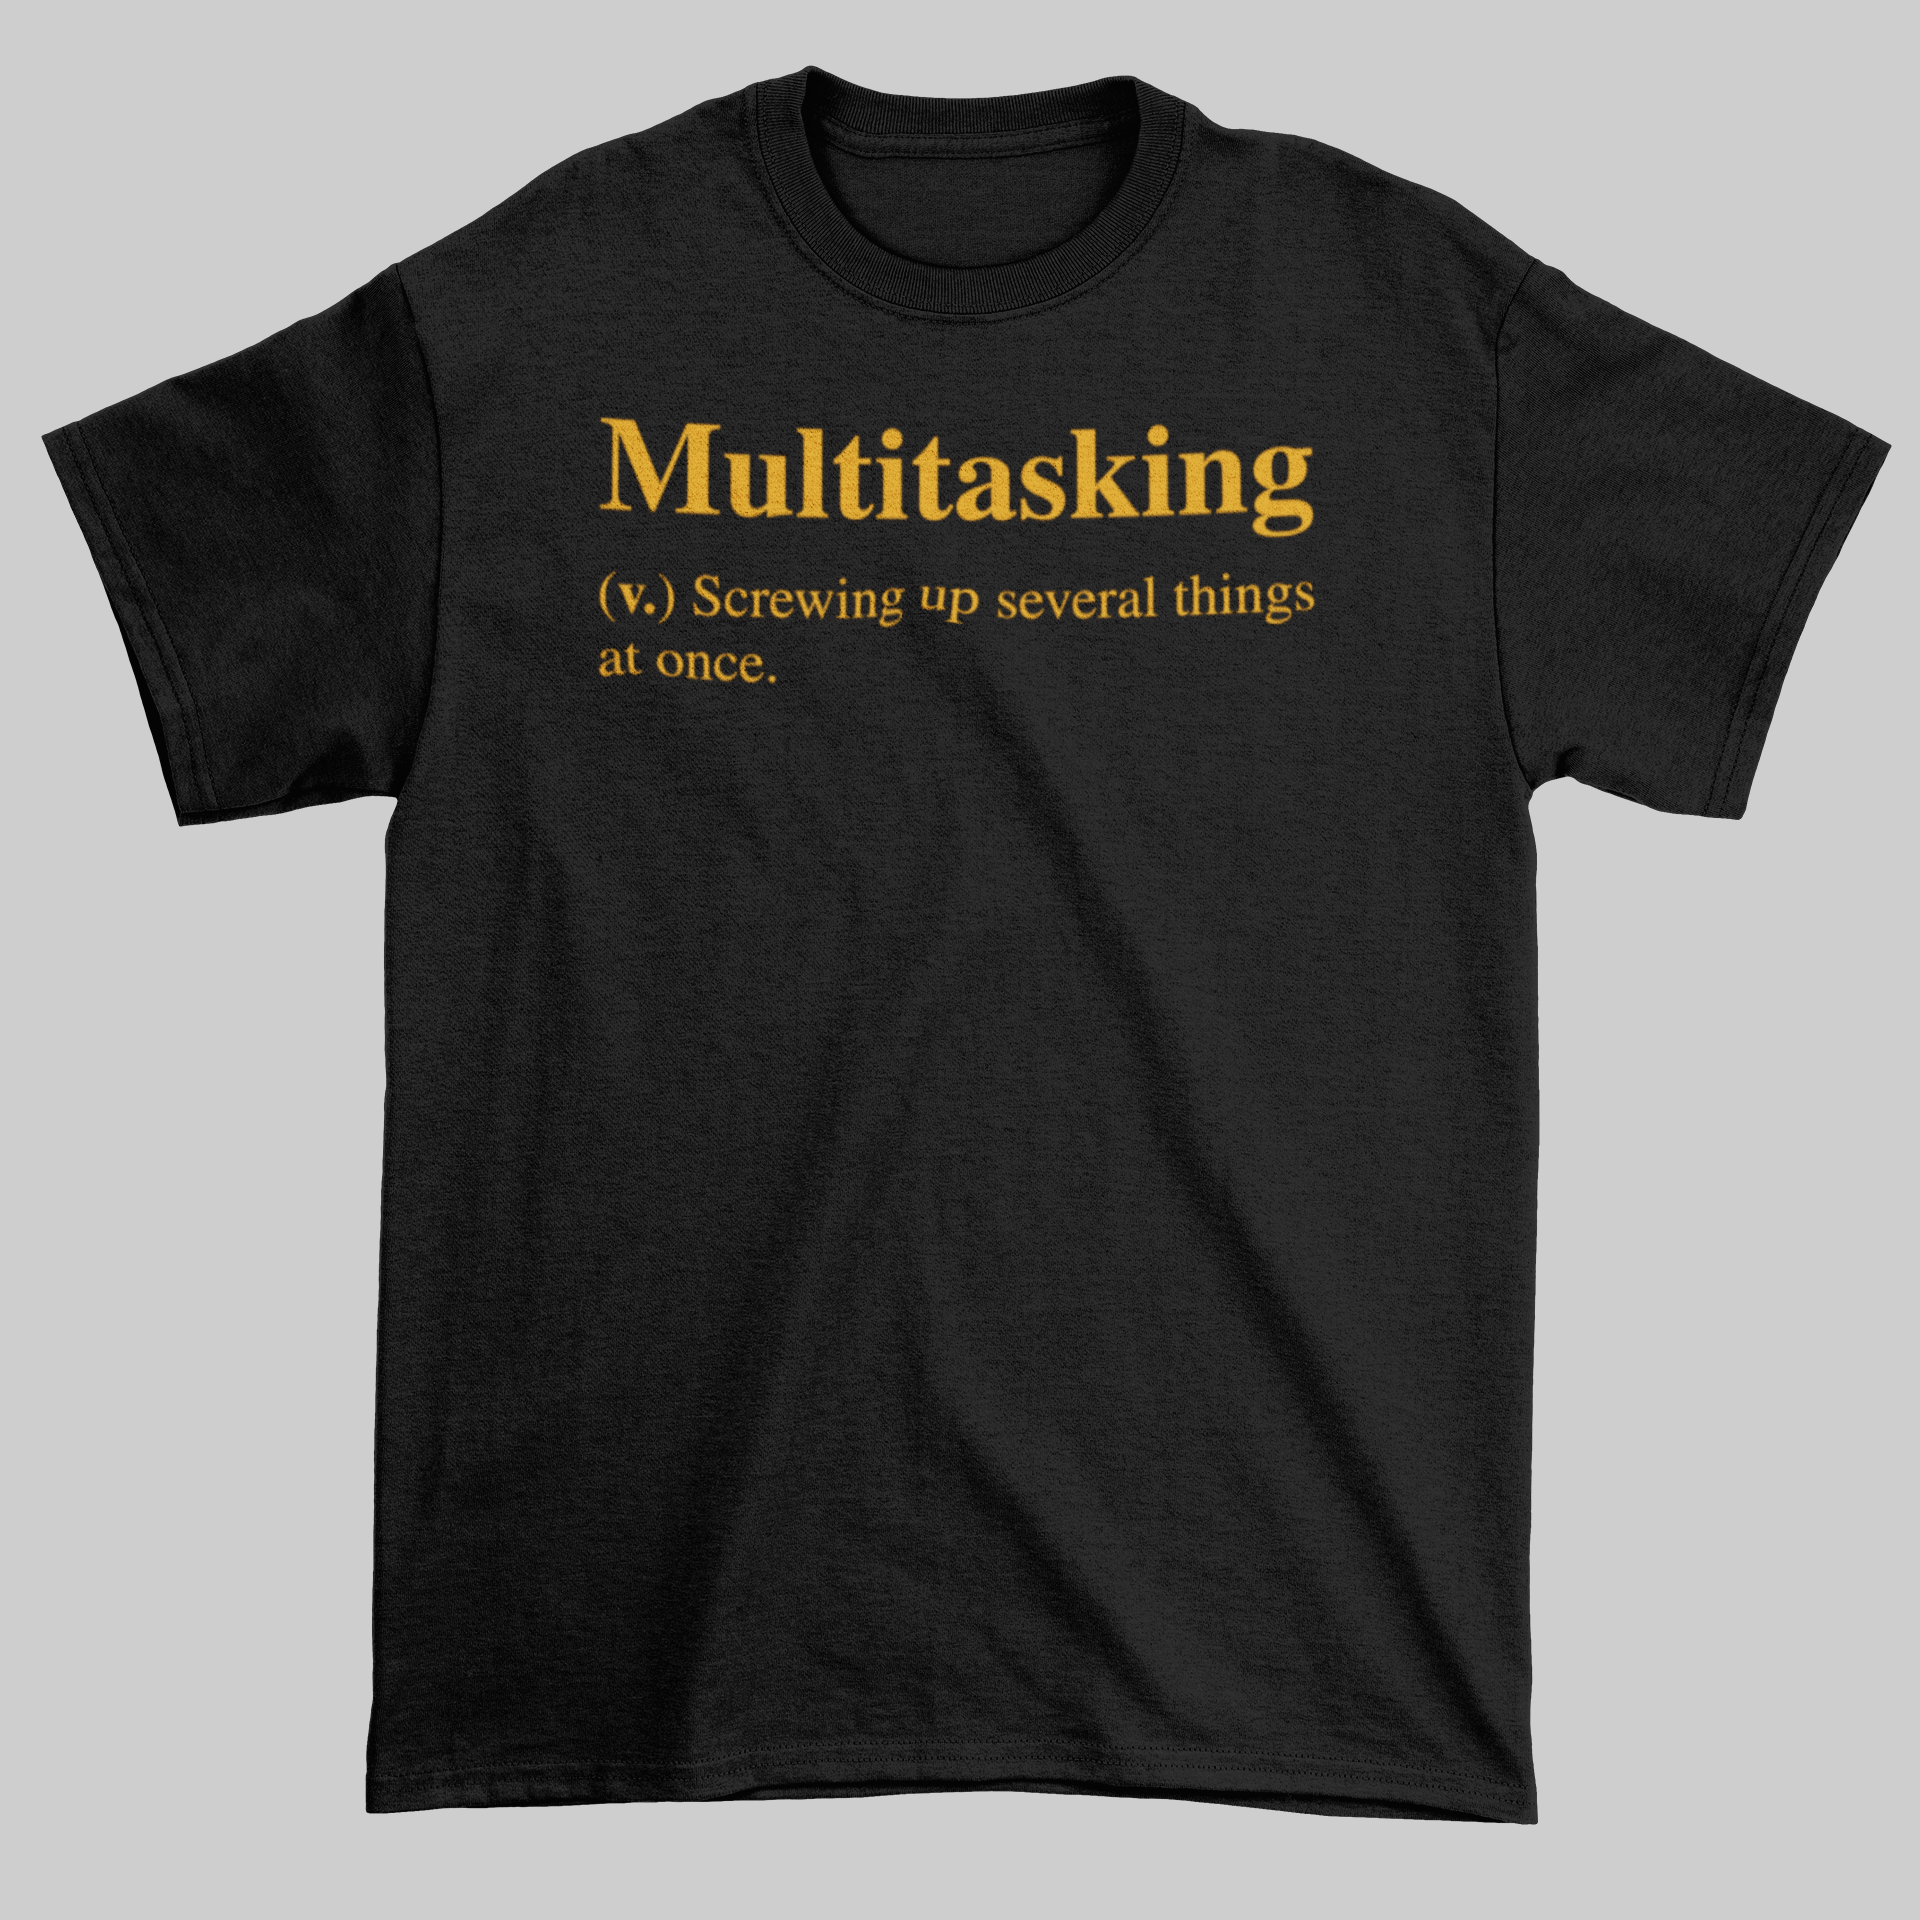 Multitasking - Screwing Up Several Things At Once - Jay's Custom Prints